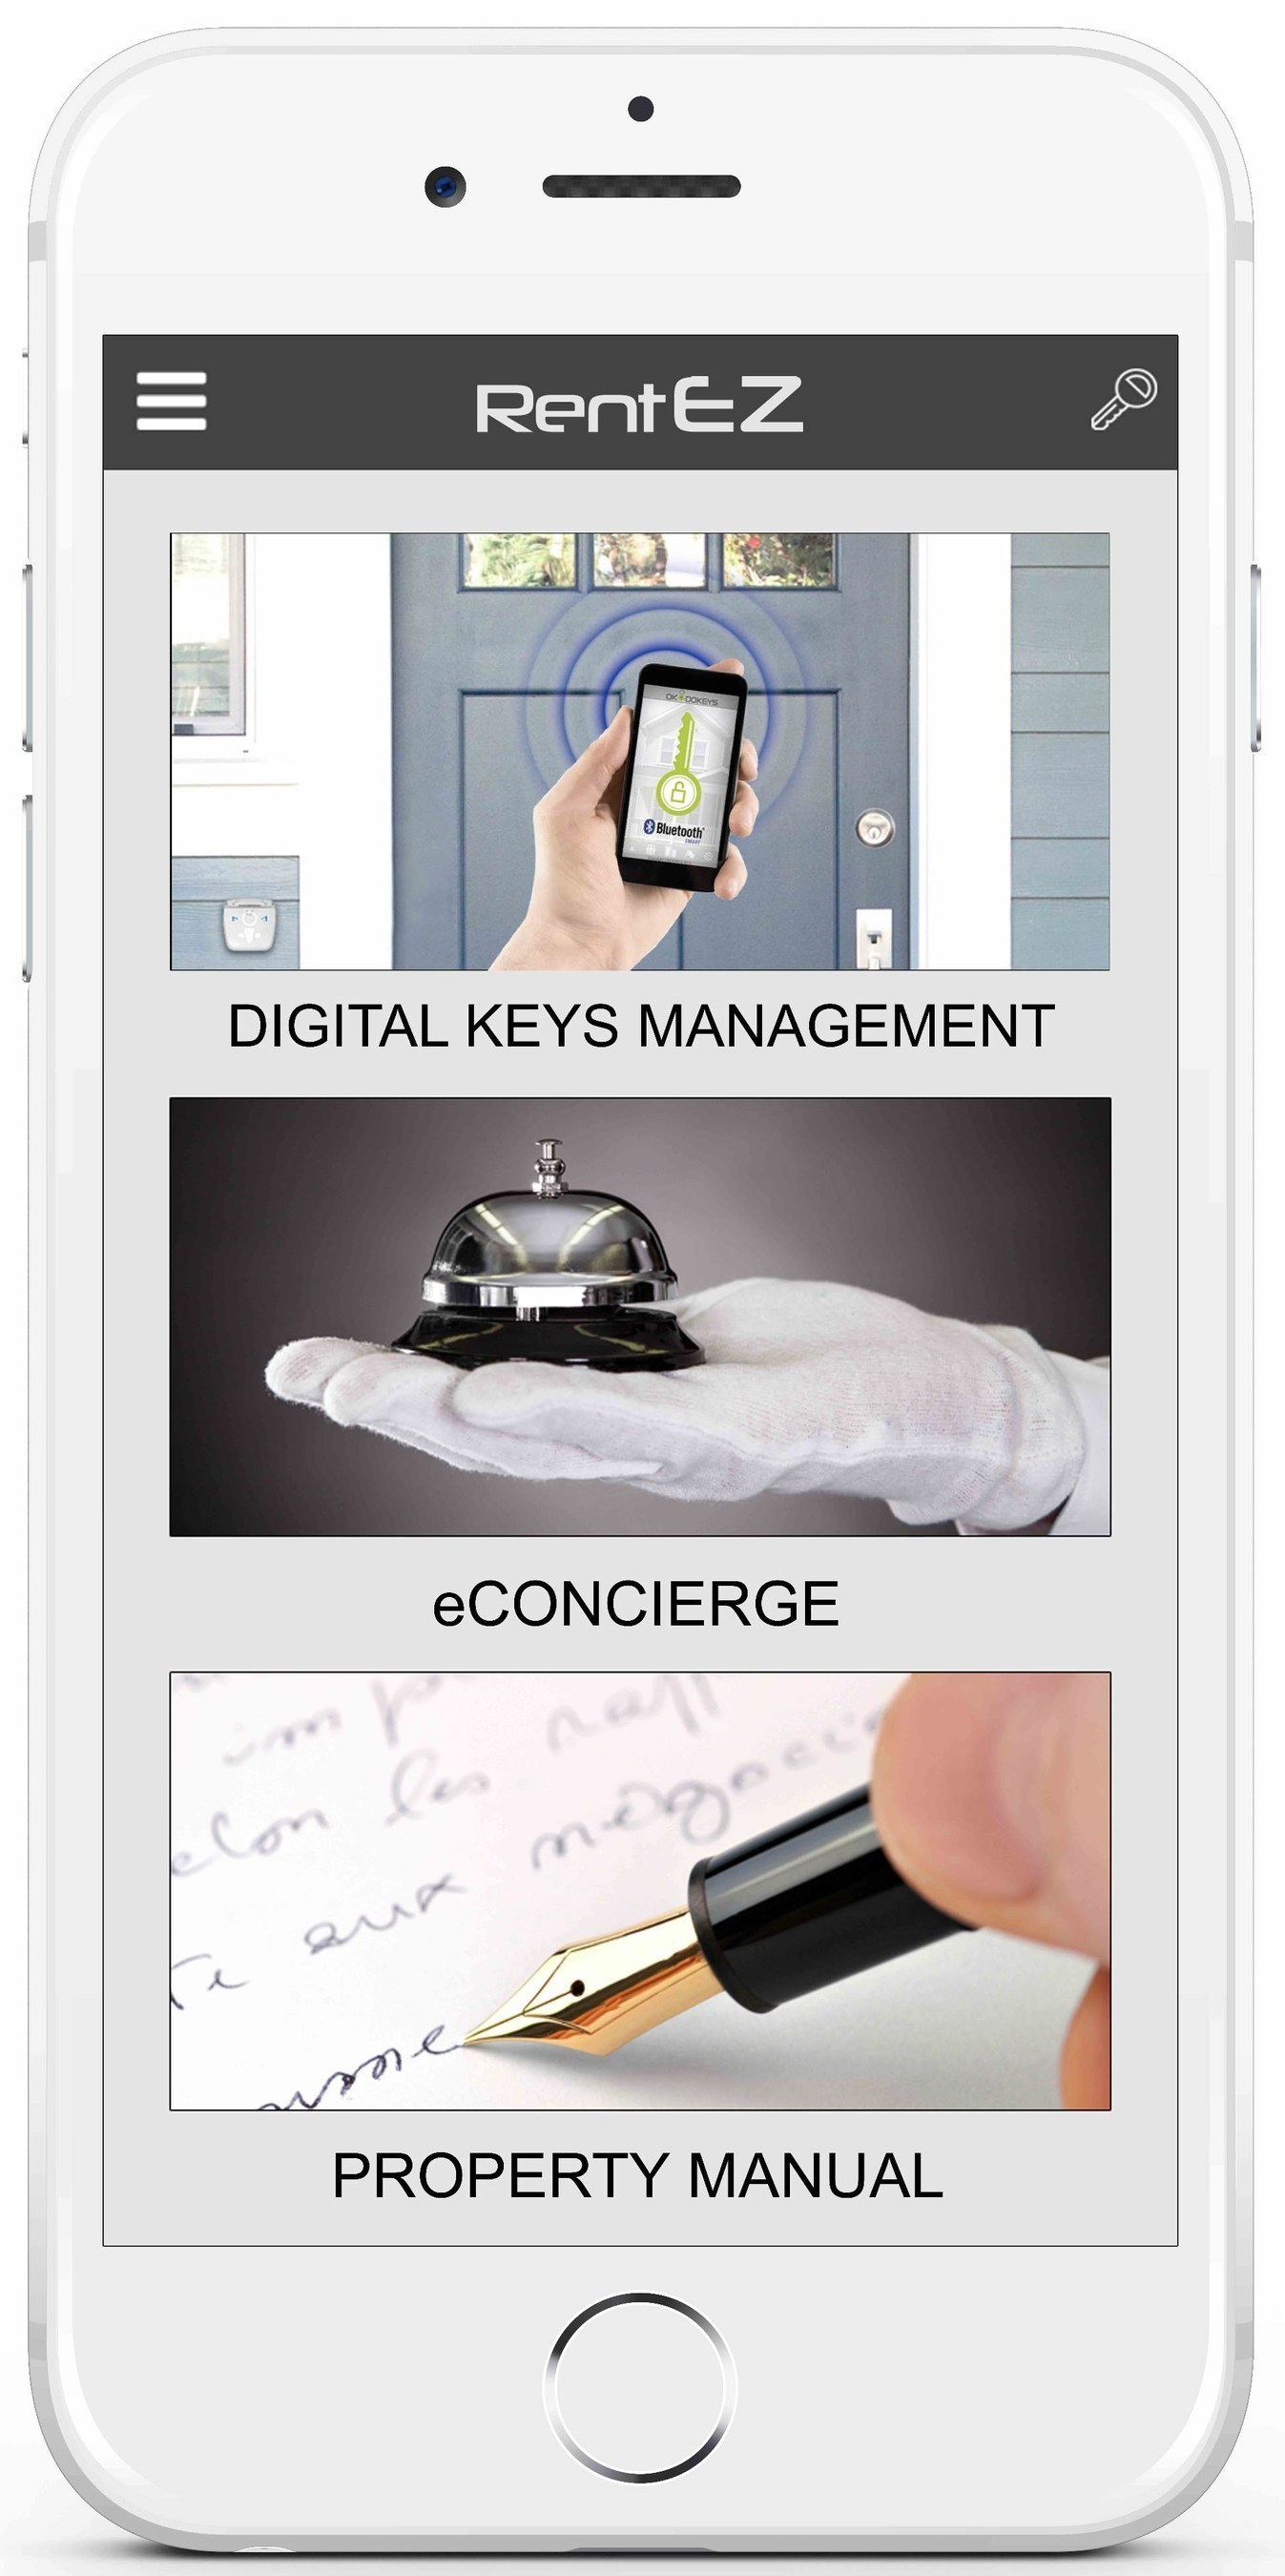 The RentEZ app from OKIDOKEYS makes professional concierge services easy and affordable for vacation rentals and home sharing.